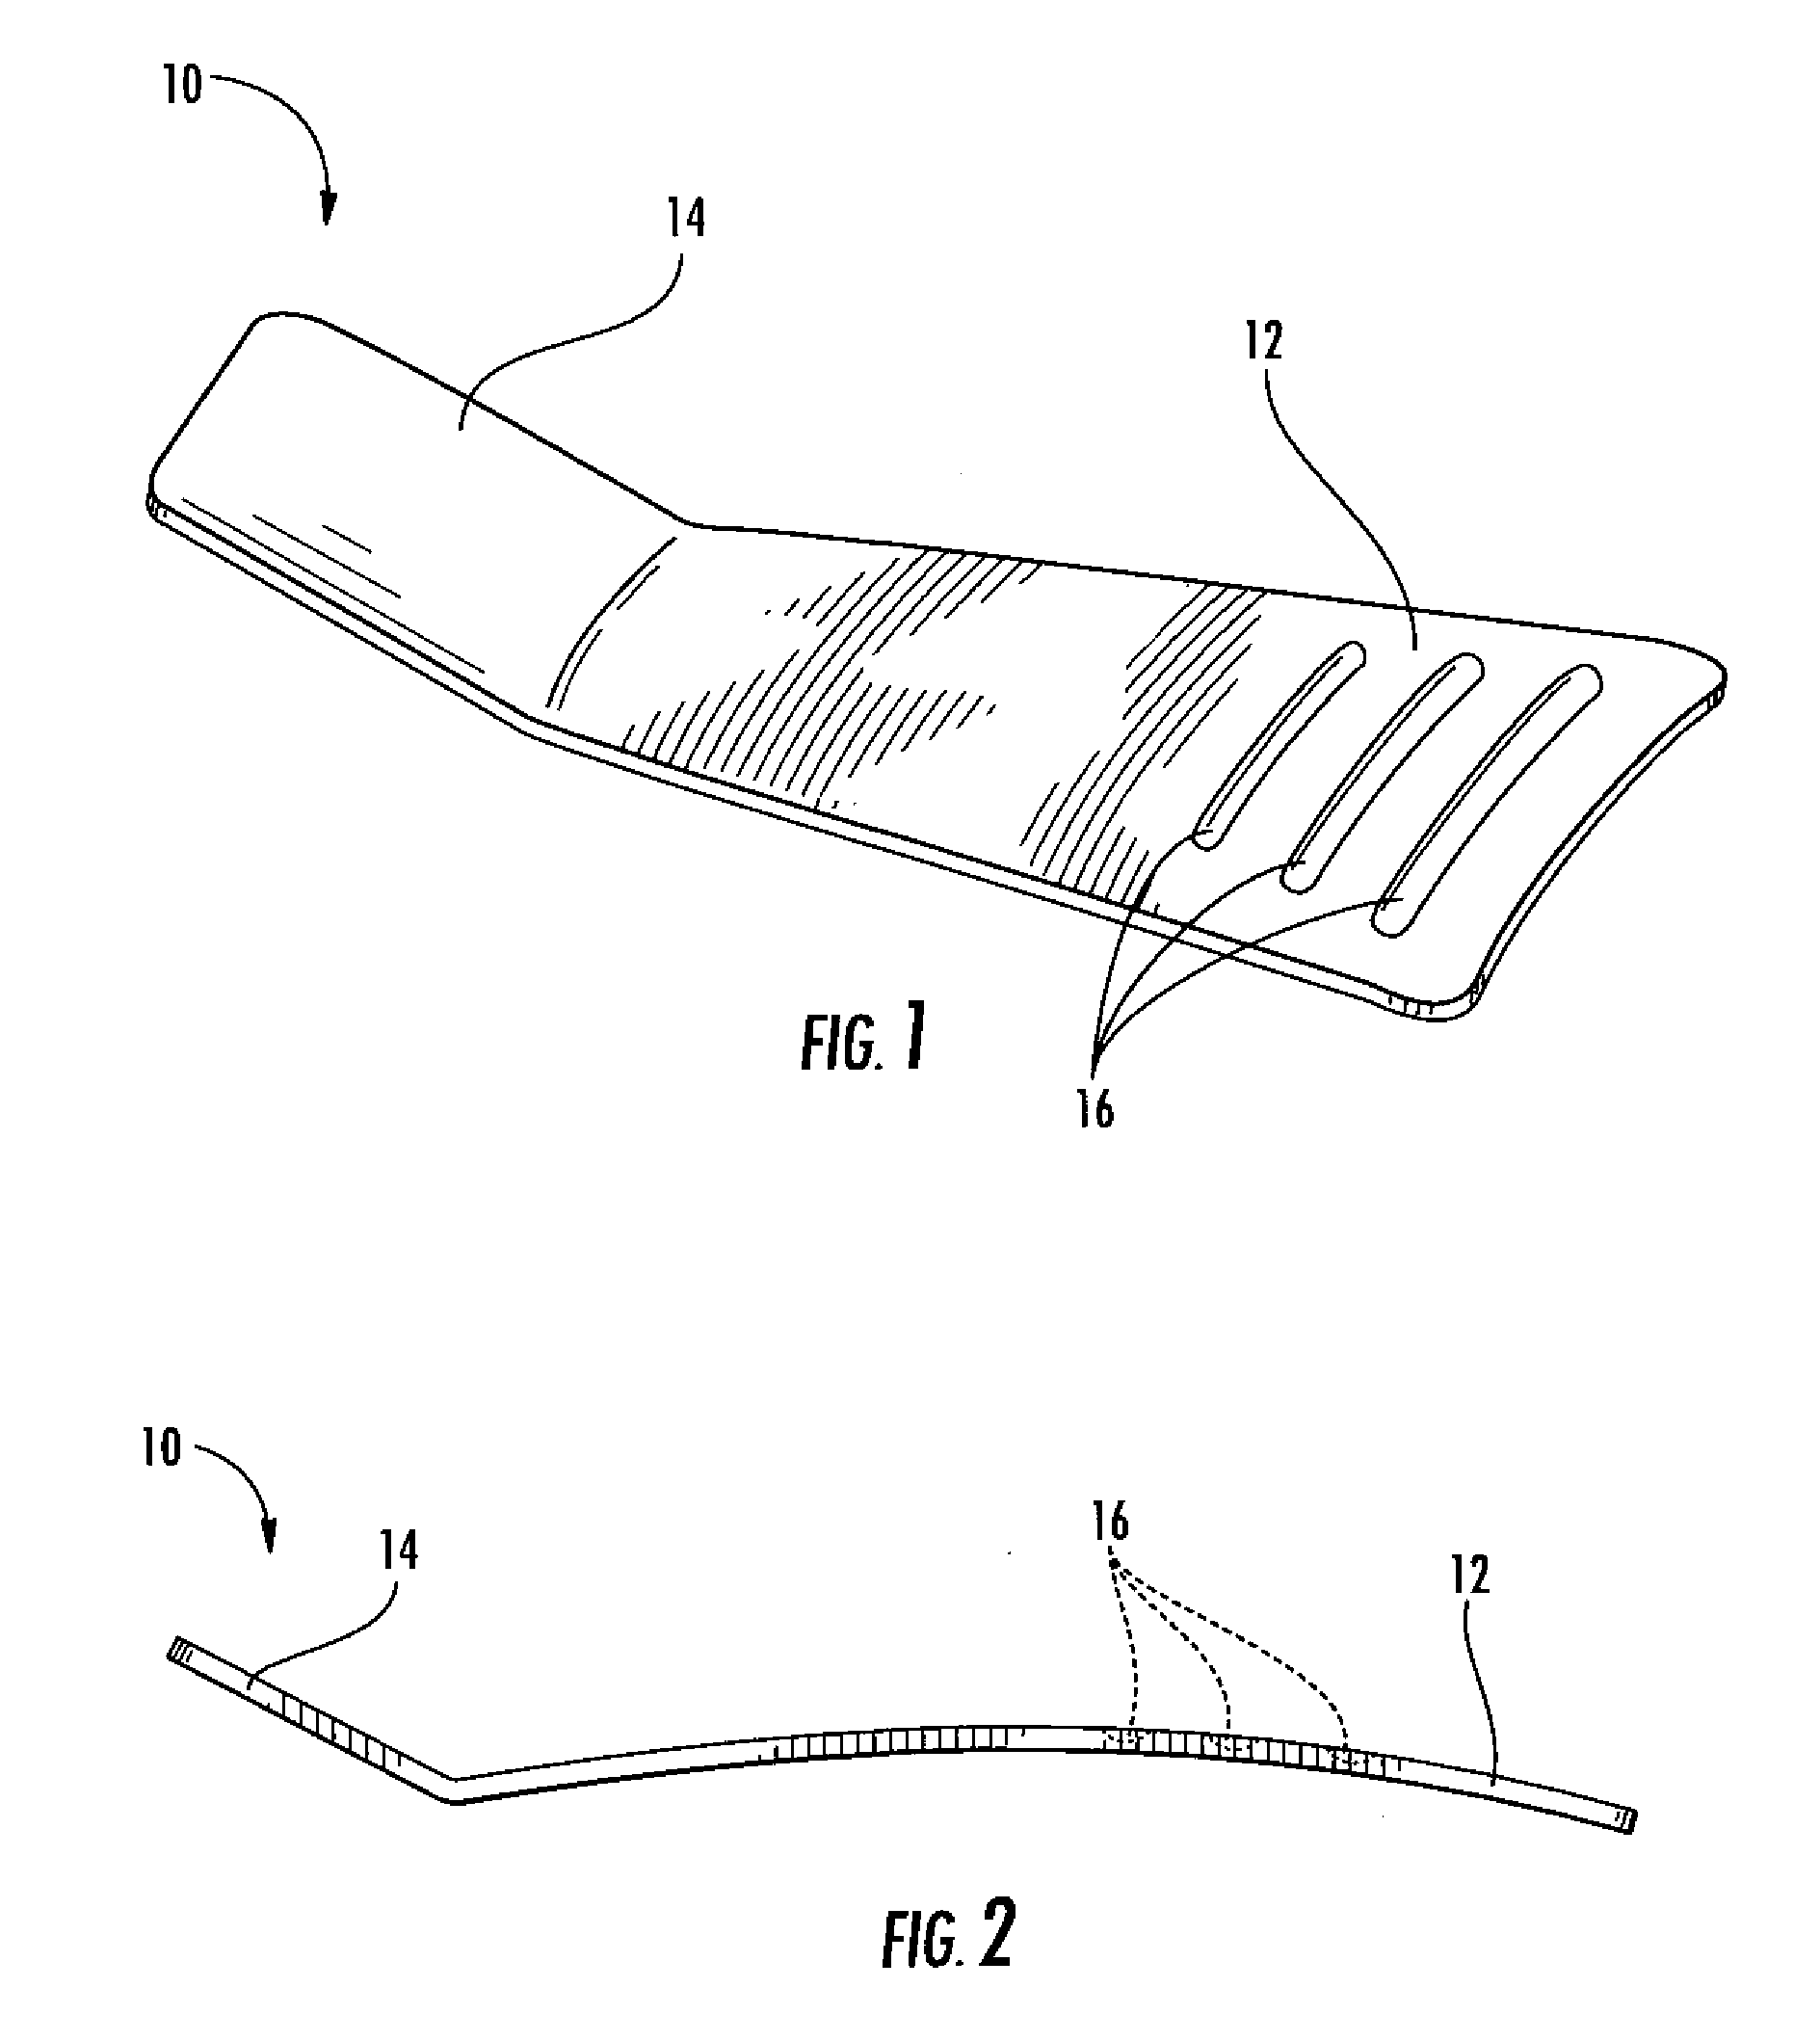 Hair removal appliance and method of using same